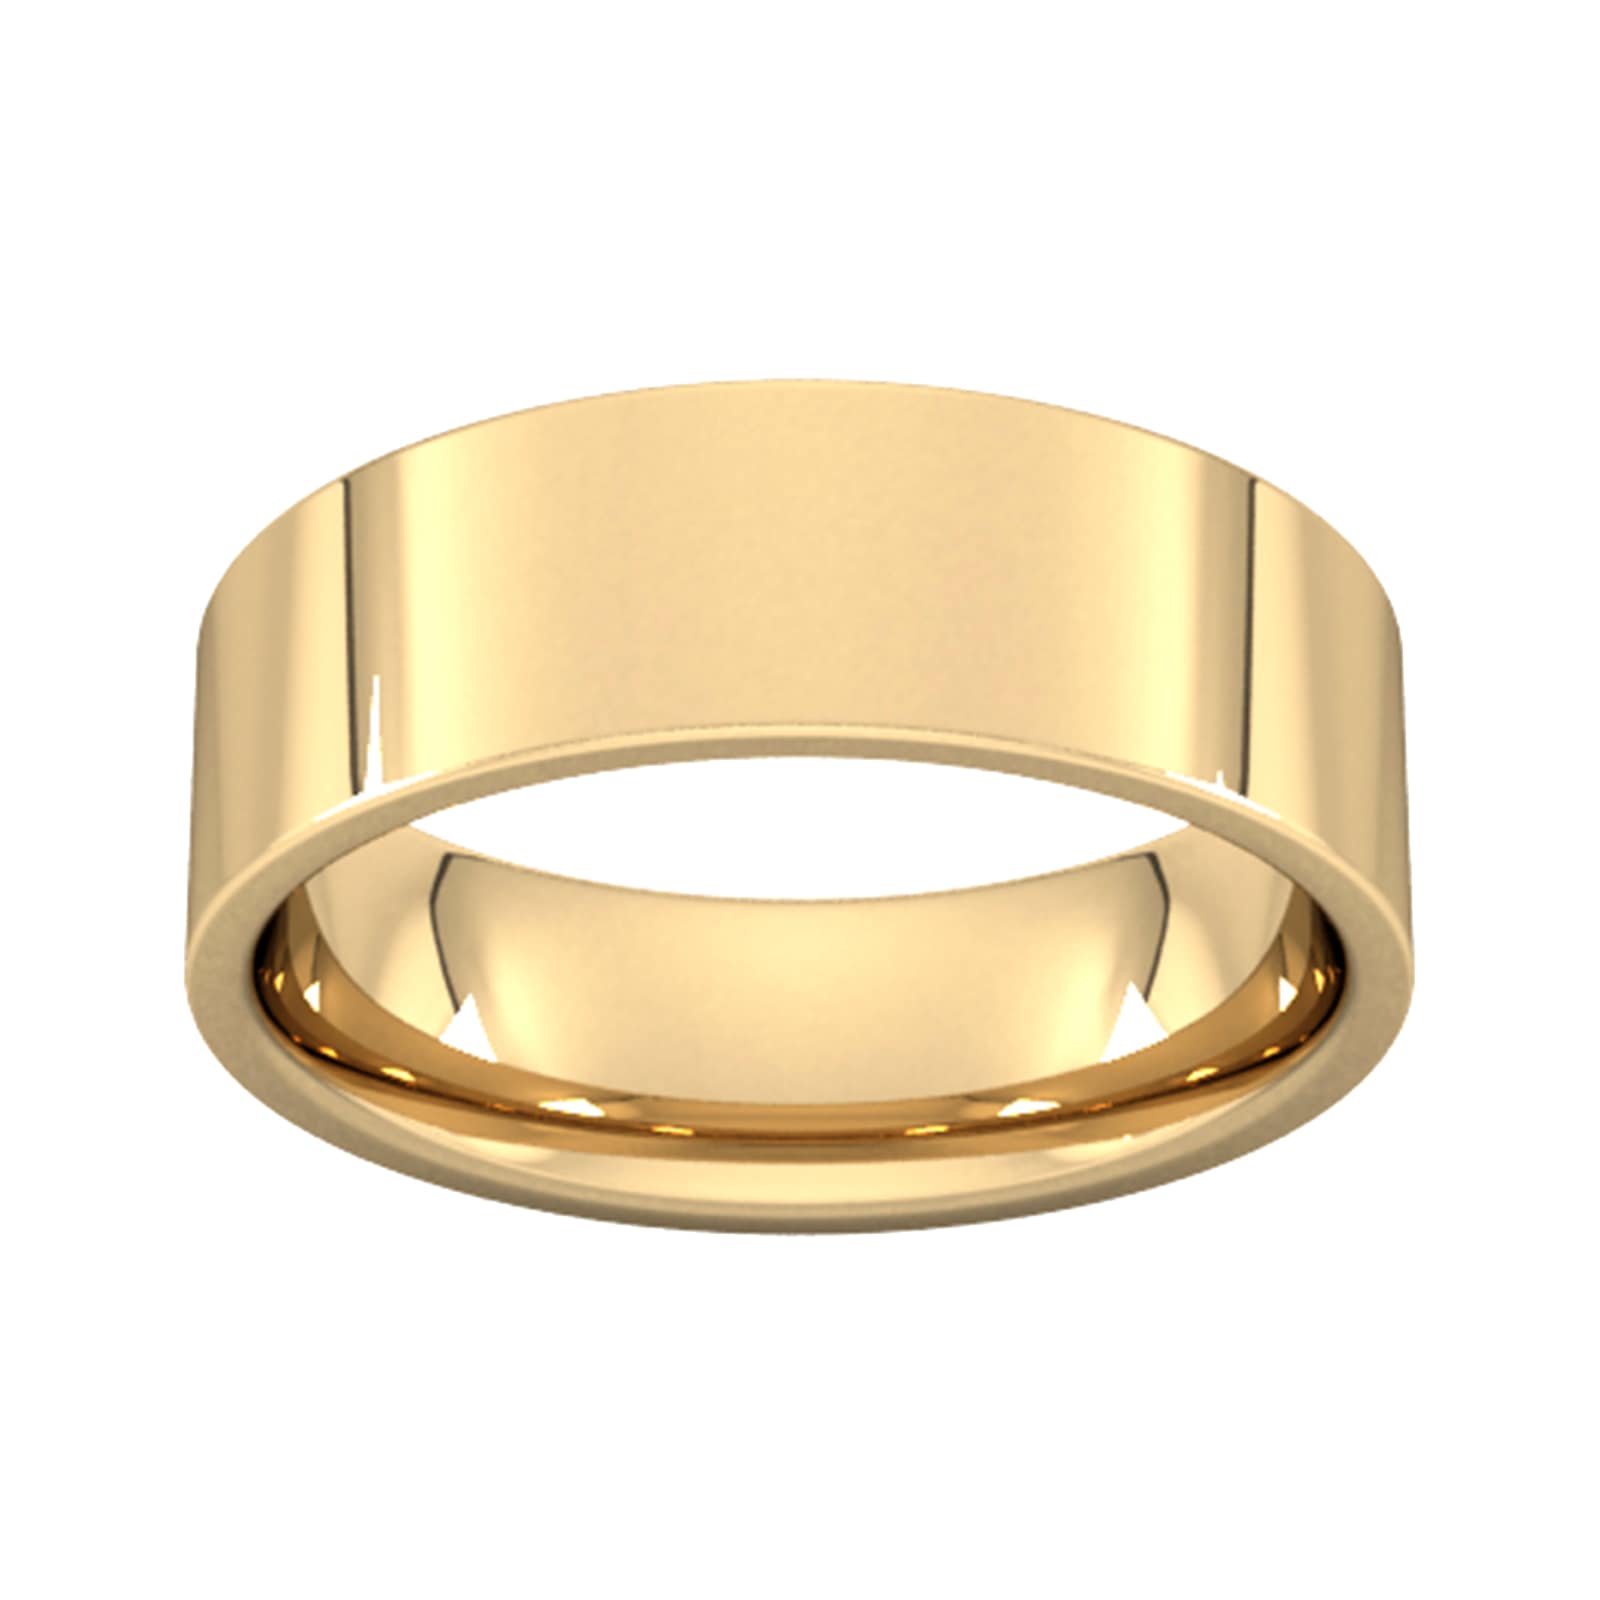 7mm Flat Court Heavy Wedding Ring In 18 Carat Yellow Gold - Ring Size U